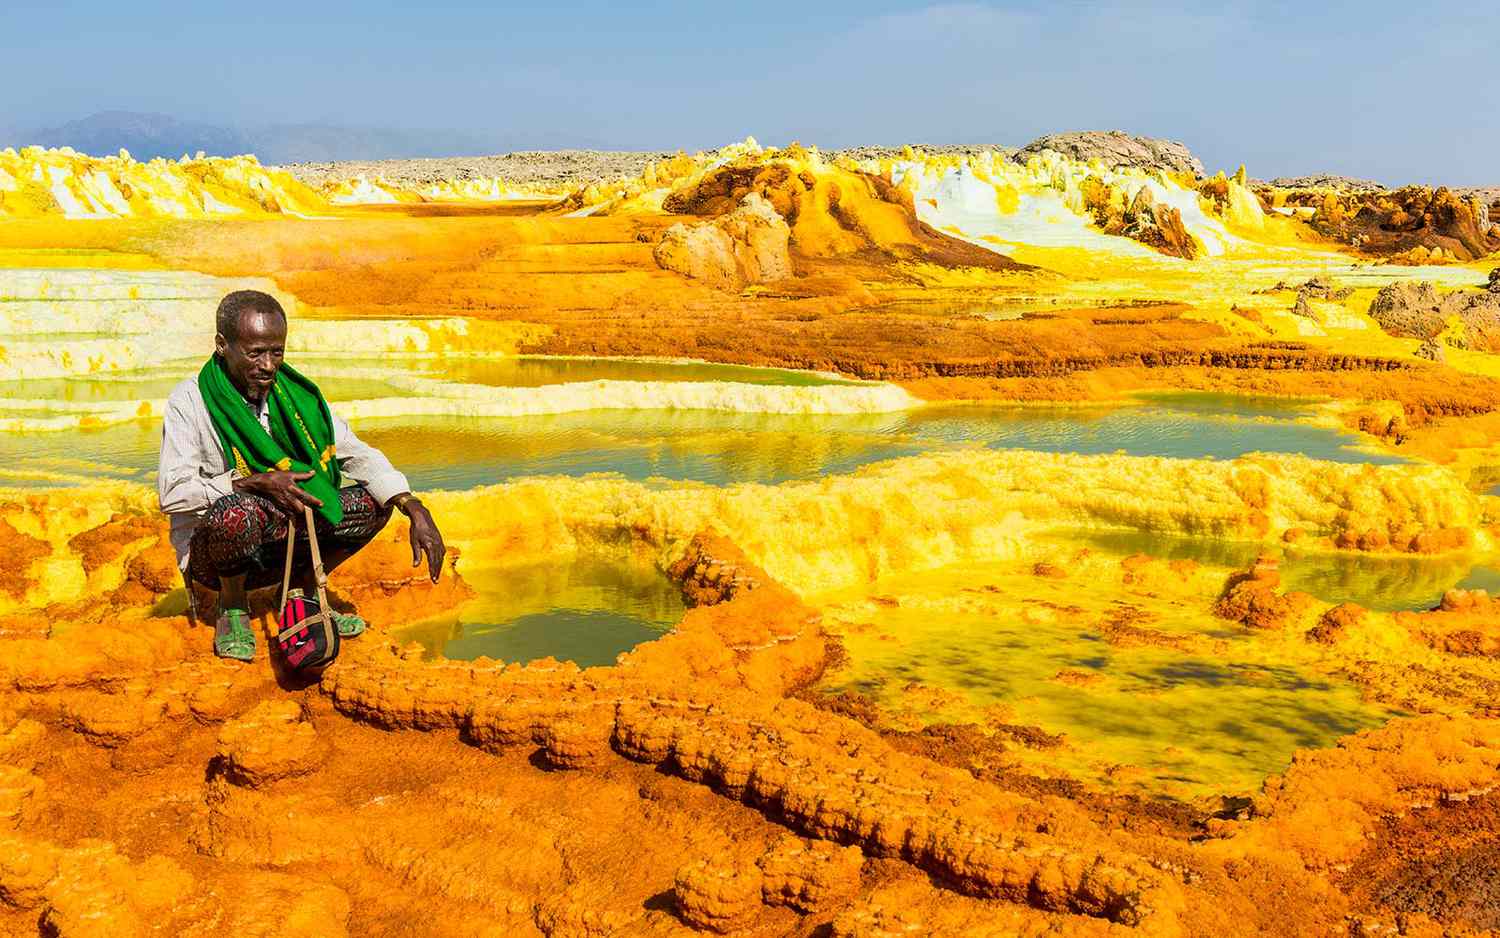 dallol-visiting-the-hottest-place-on-earth